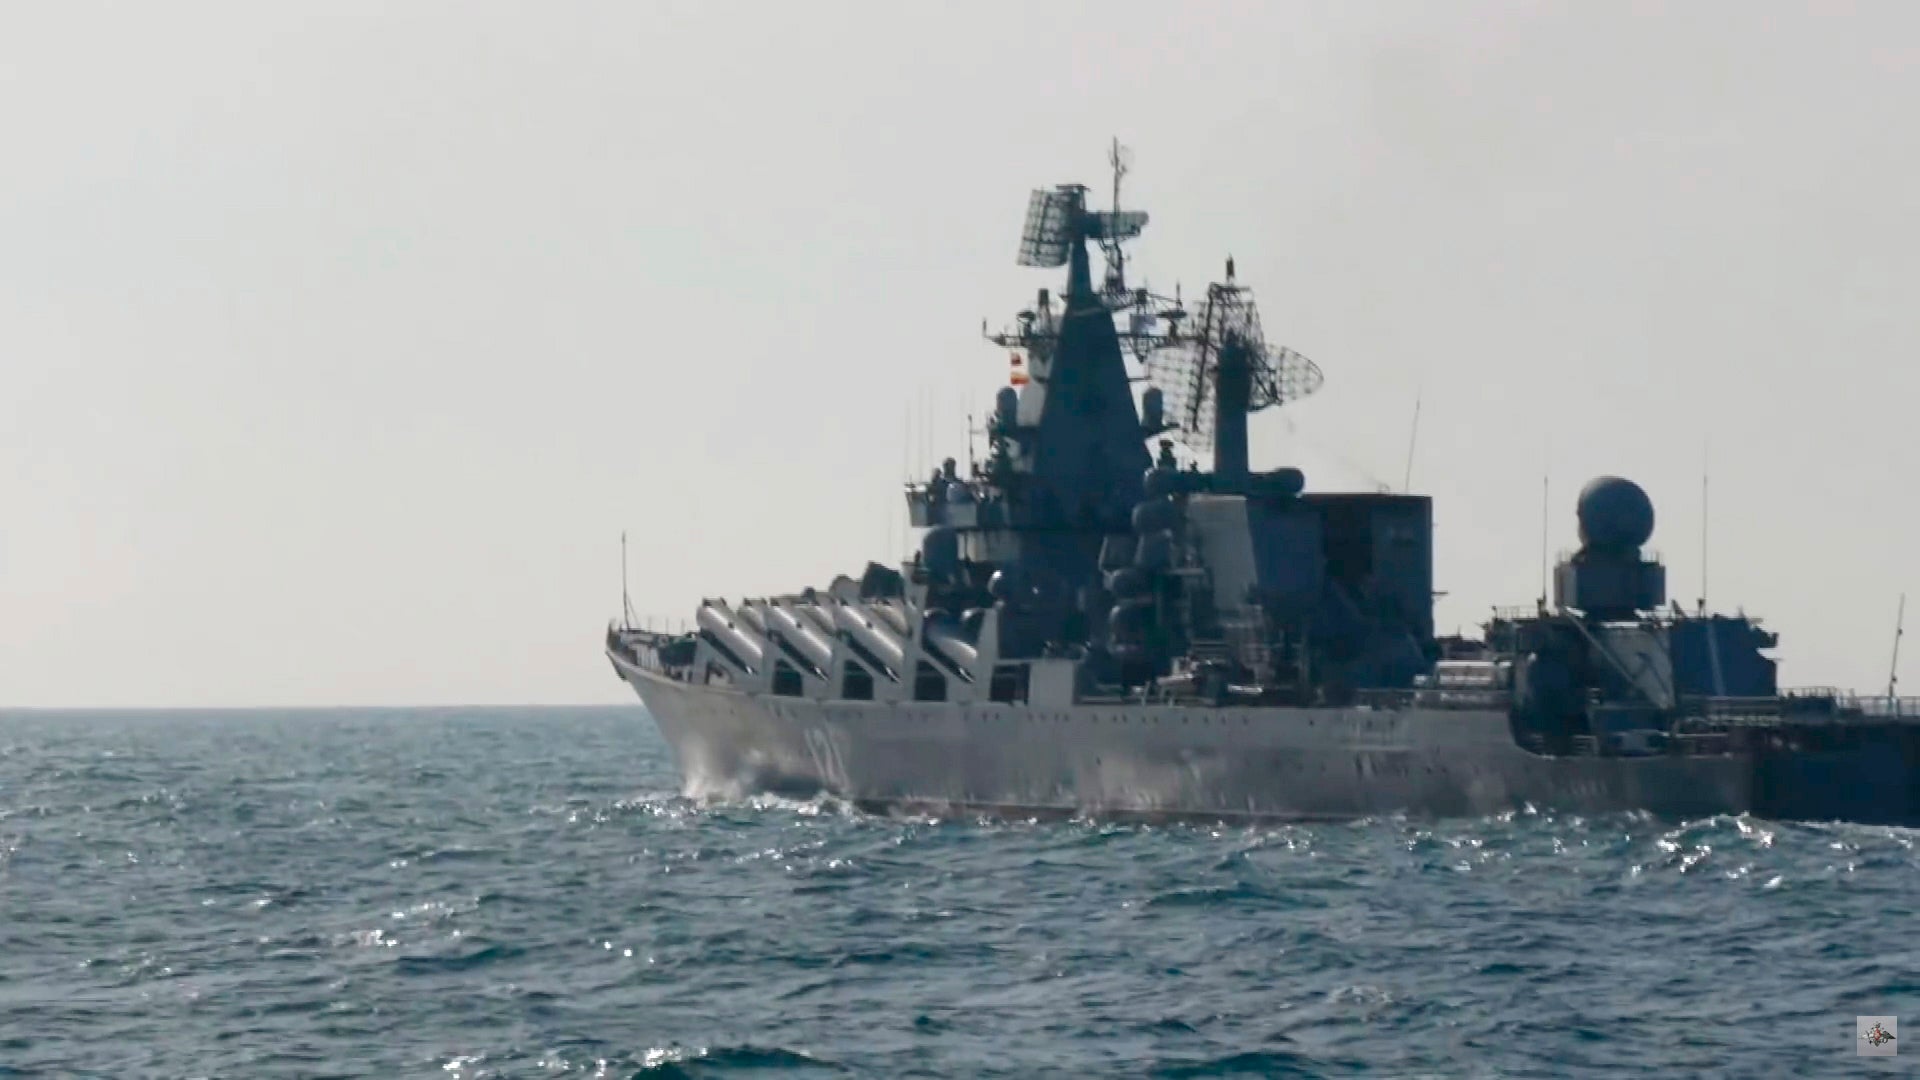 Russian Navy missile cruiser ‘Moskva’ sunk following a fire in April after reportedly being hit by Ukrainian missiles